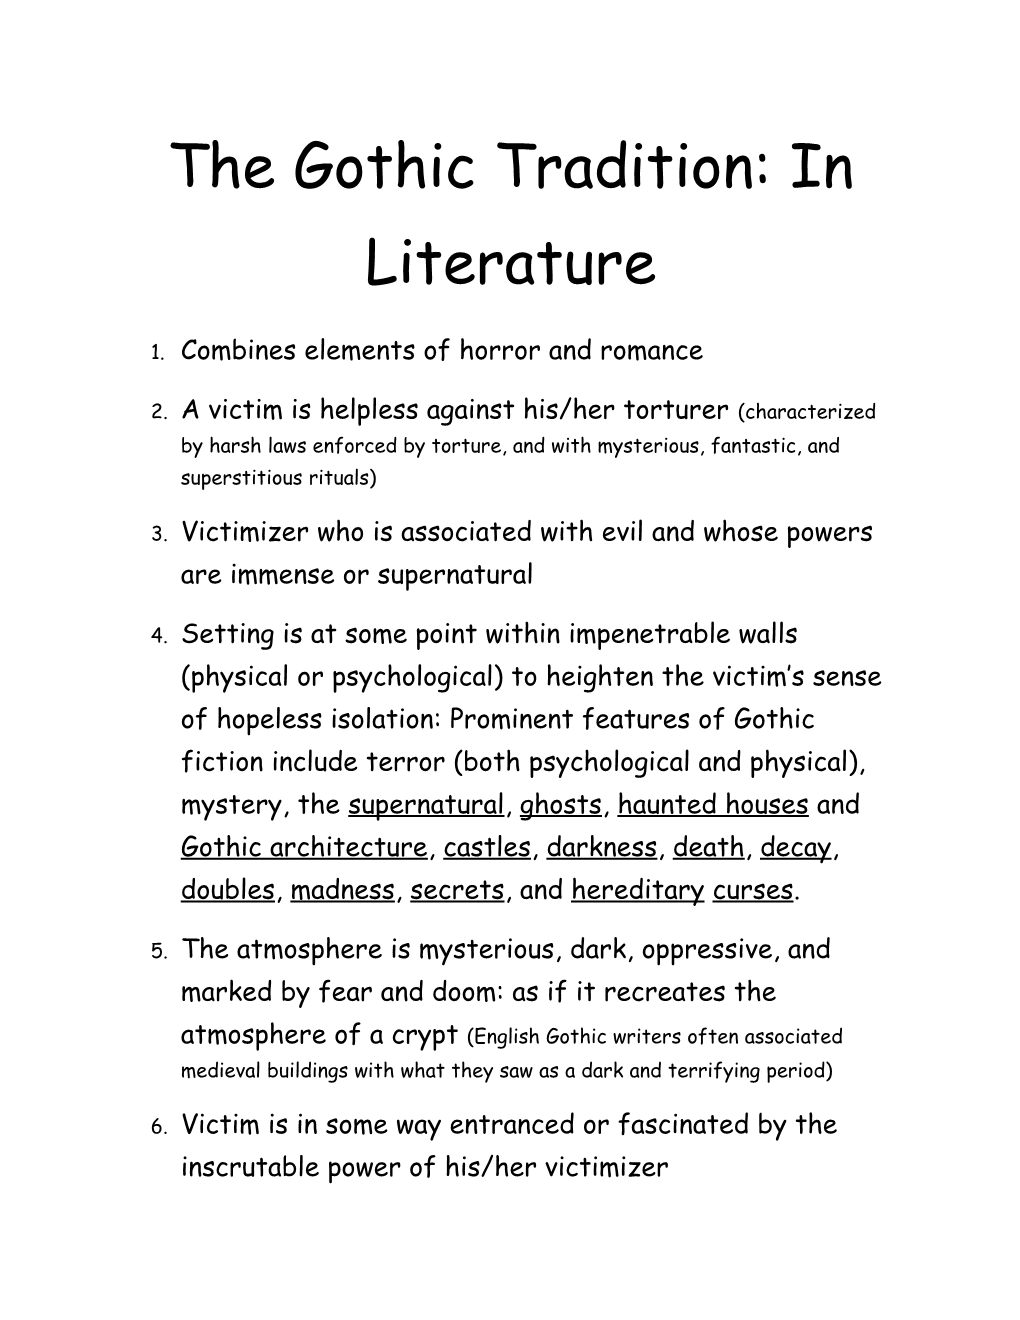 The Gothic Tradition: in Literature